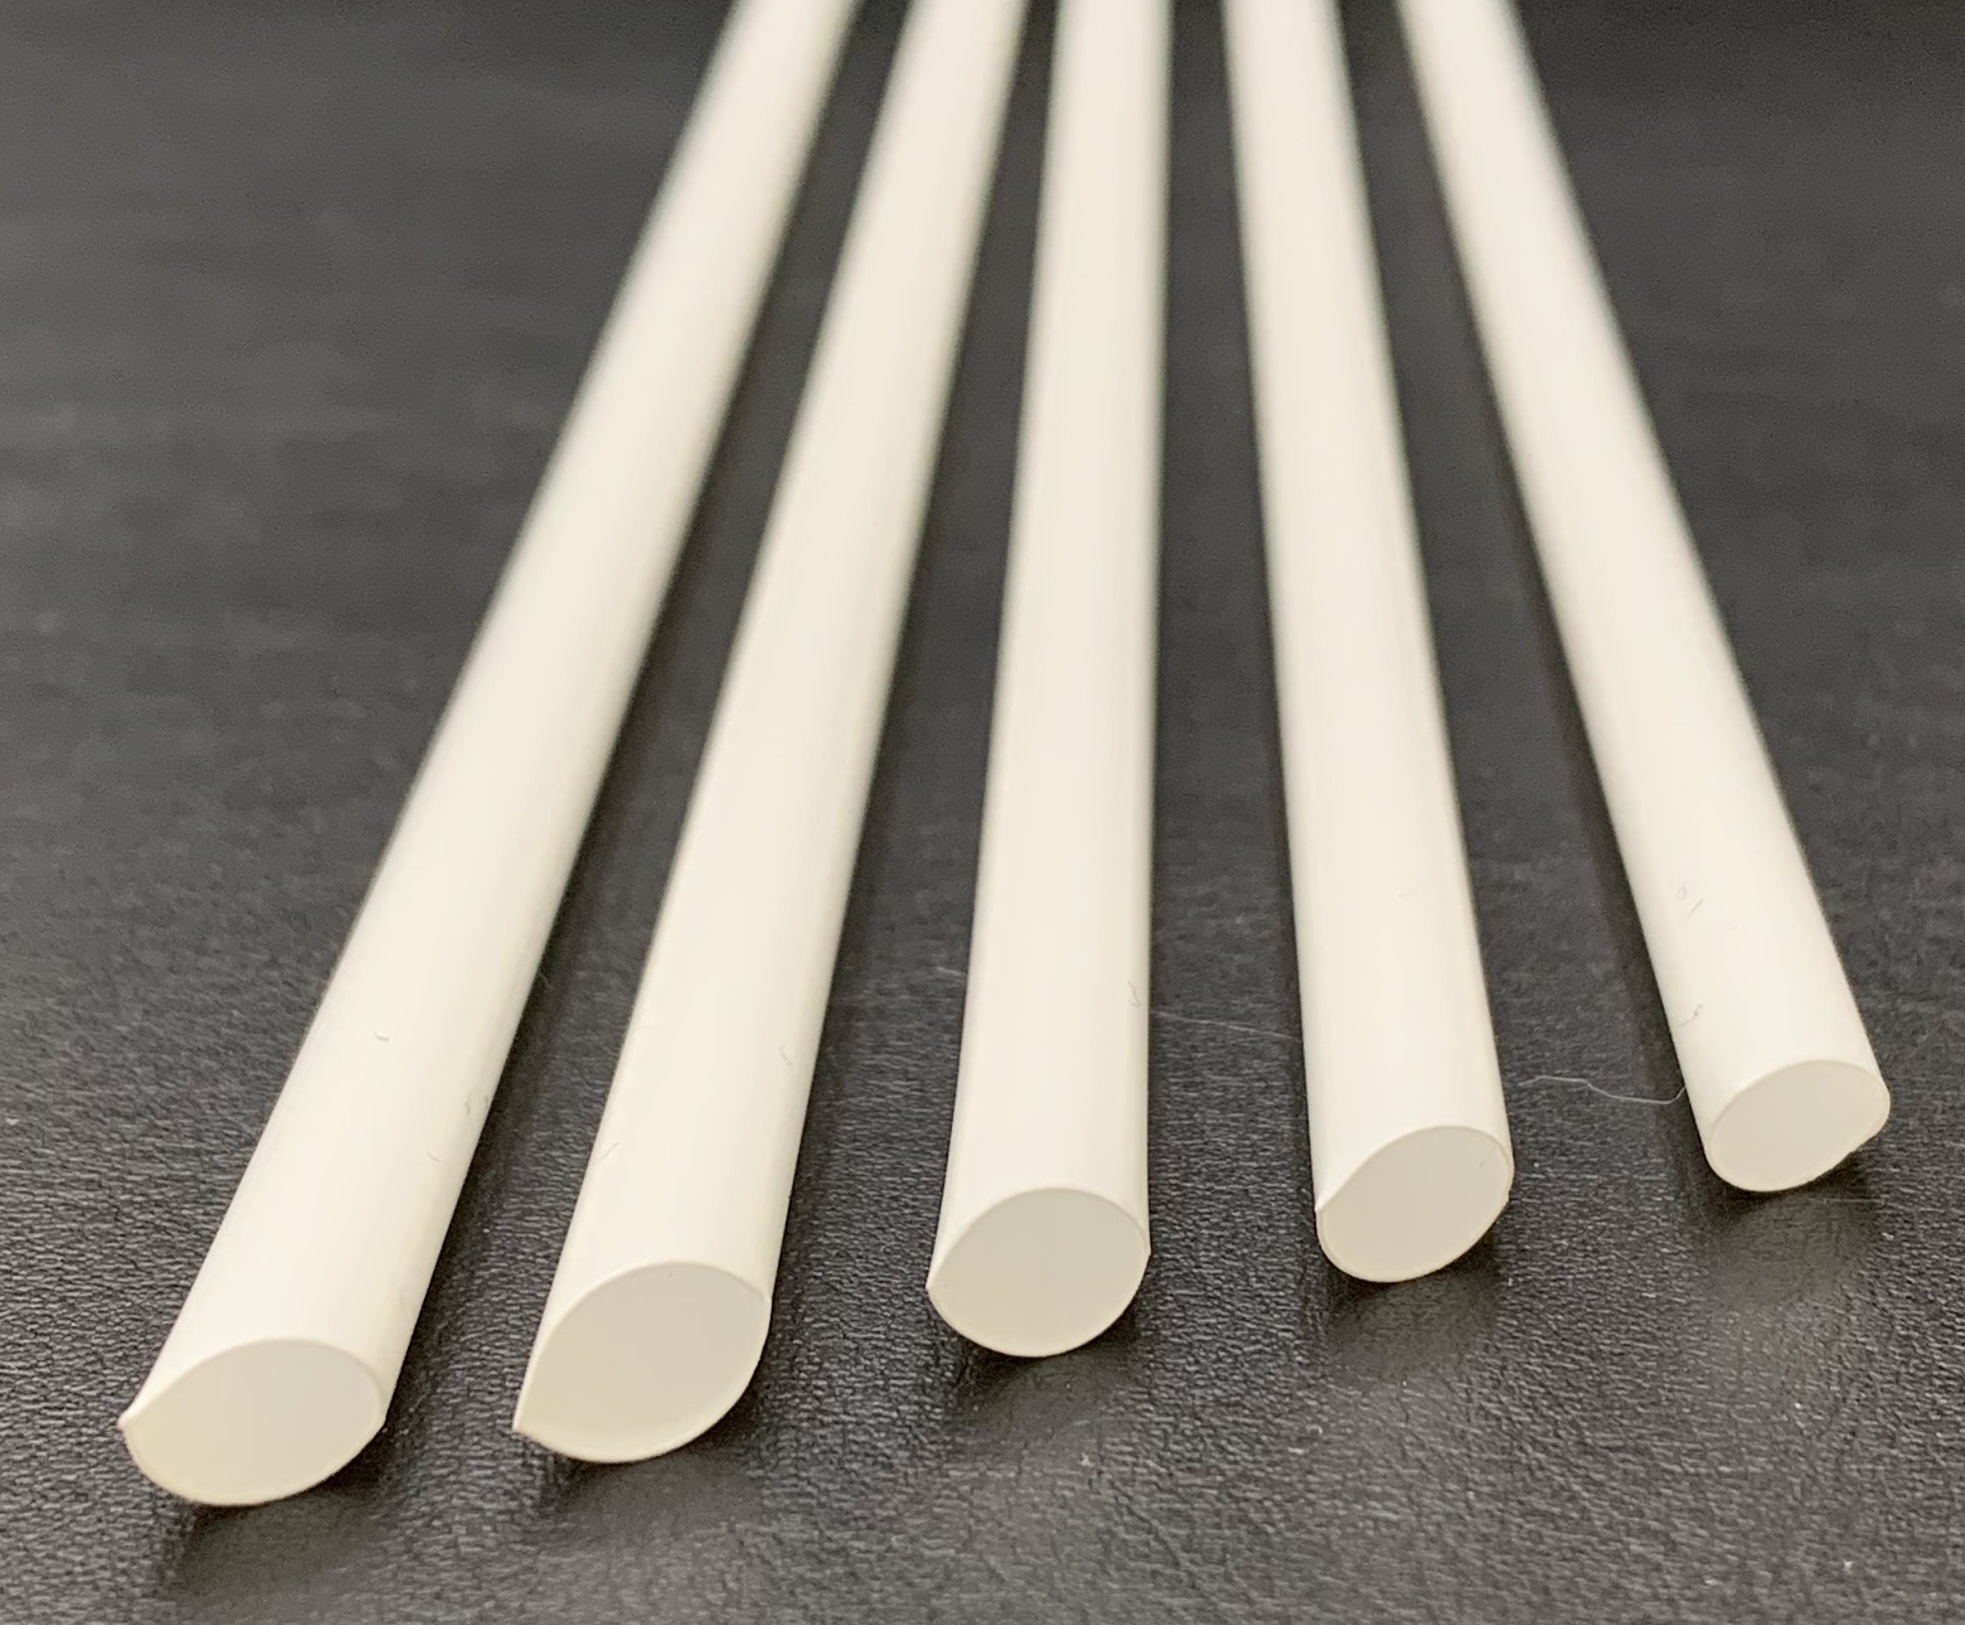 8mm-PLA Heat-Resistant Compostable Straw